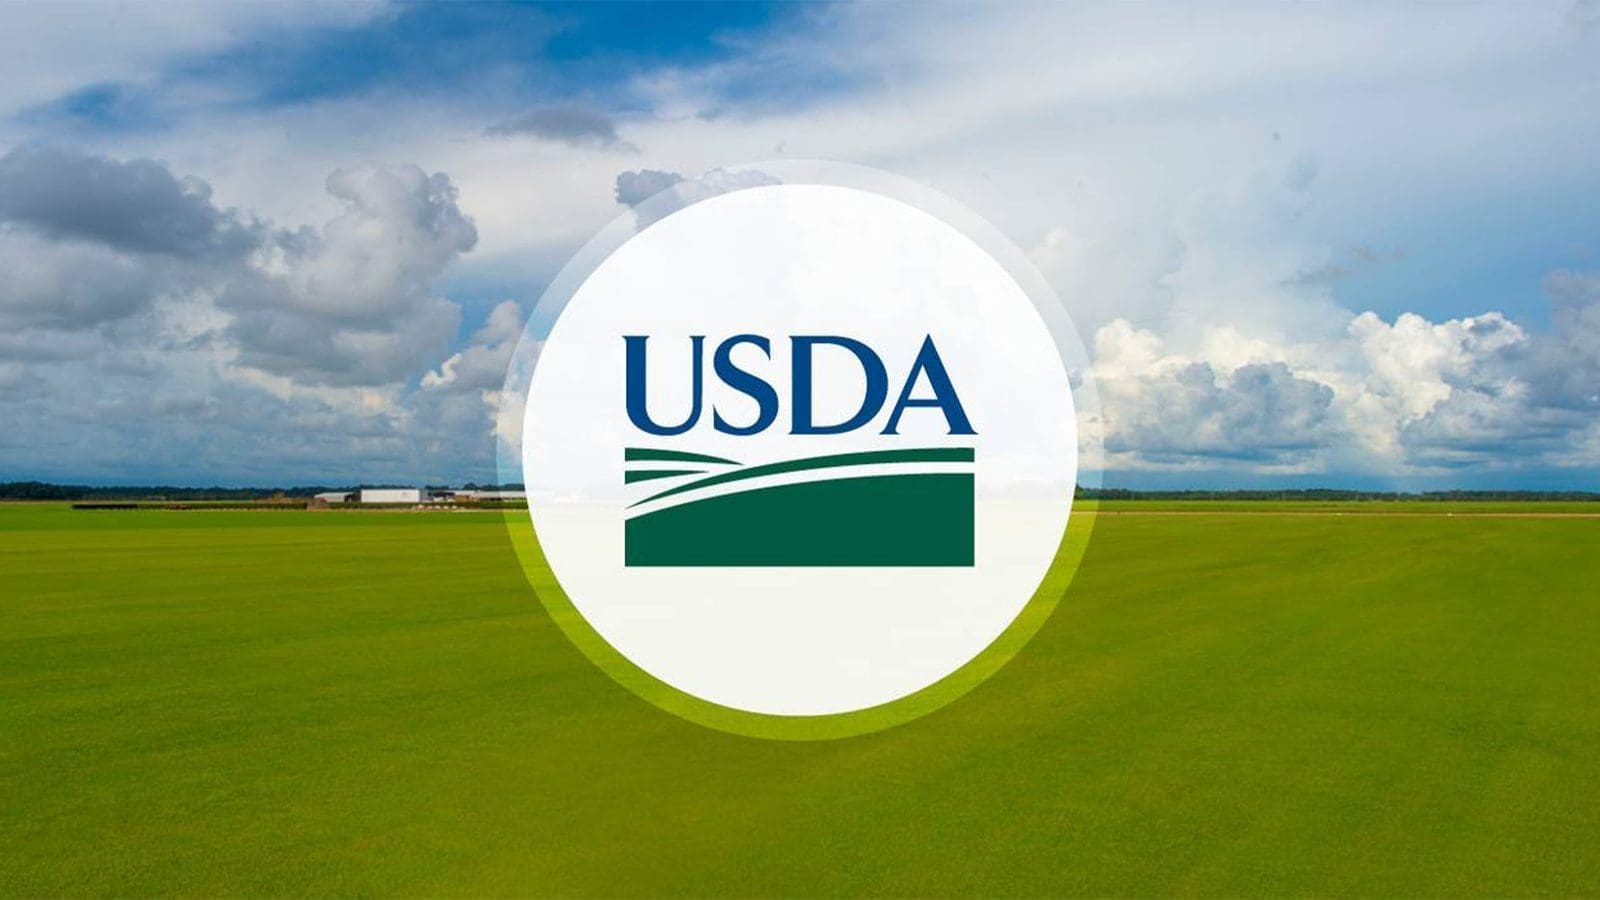 USDA commits to enhancing access to information, compliance in underserved communities